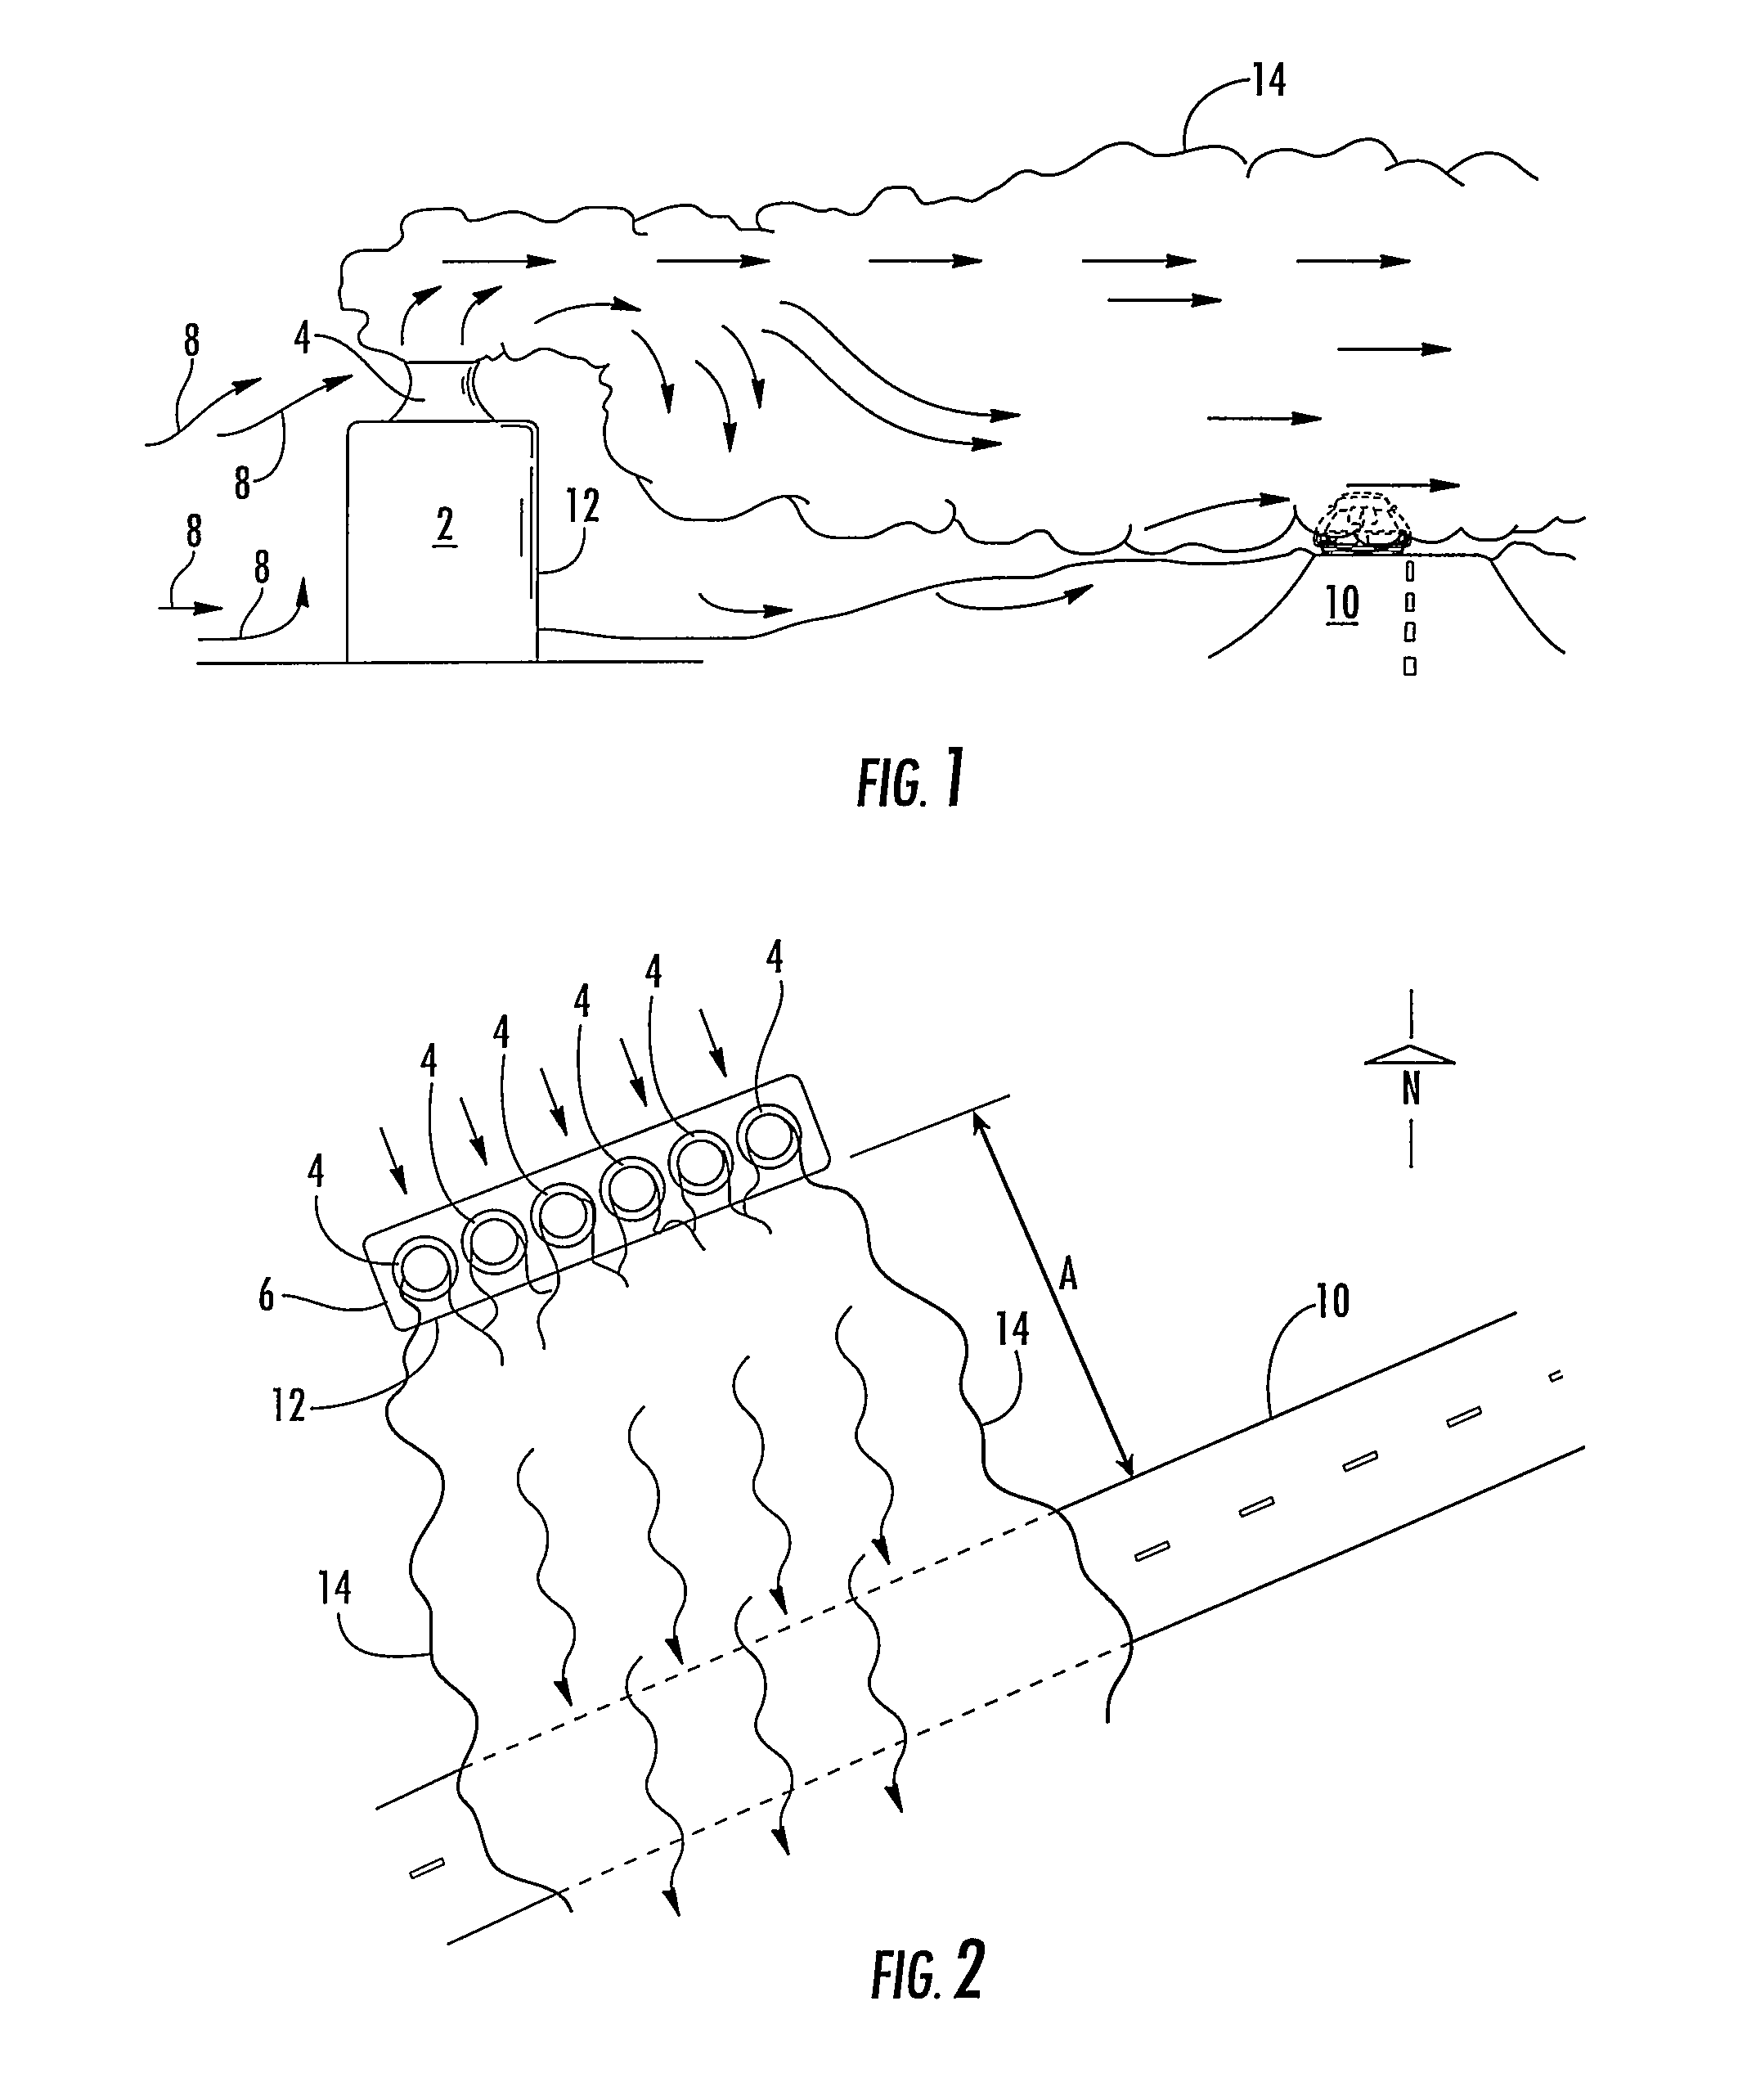 Method of reducing downward flow of air currents on the lee side of exterior structures